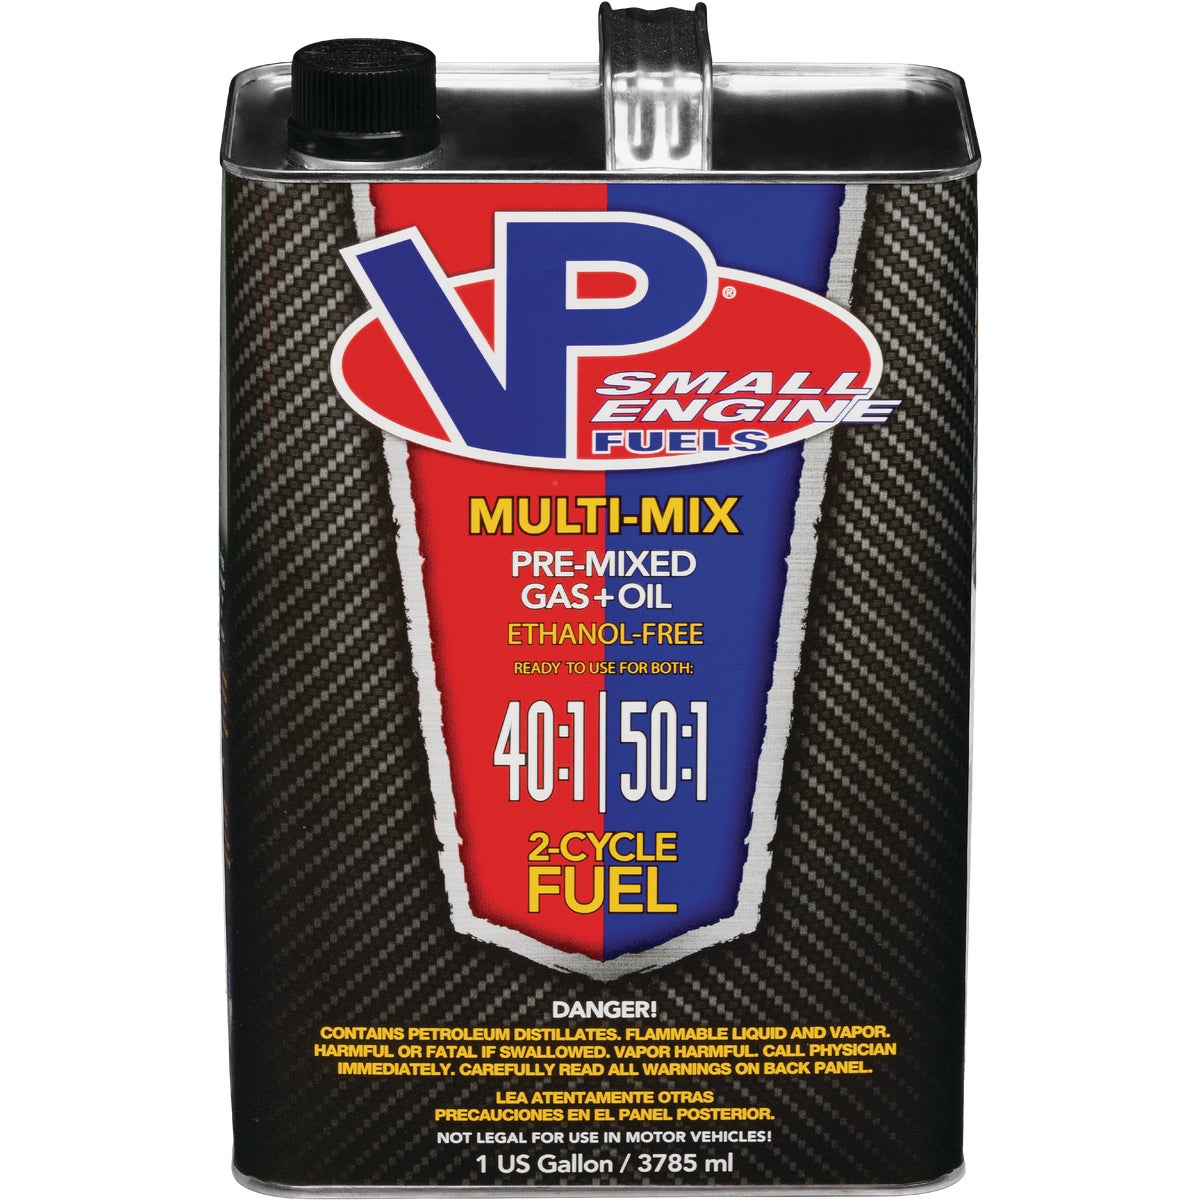 VP Small Engine Fuels Gal. 40:1/50:1 Ethanol-Free Multi-Mix Gas & Oil Pre-Mix